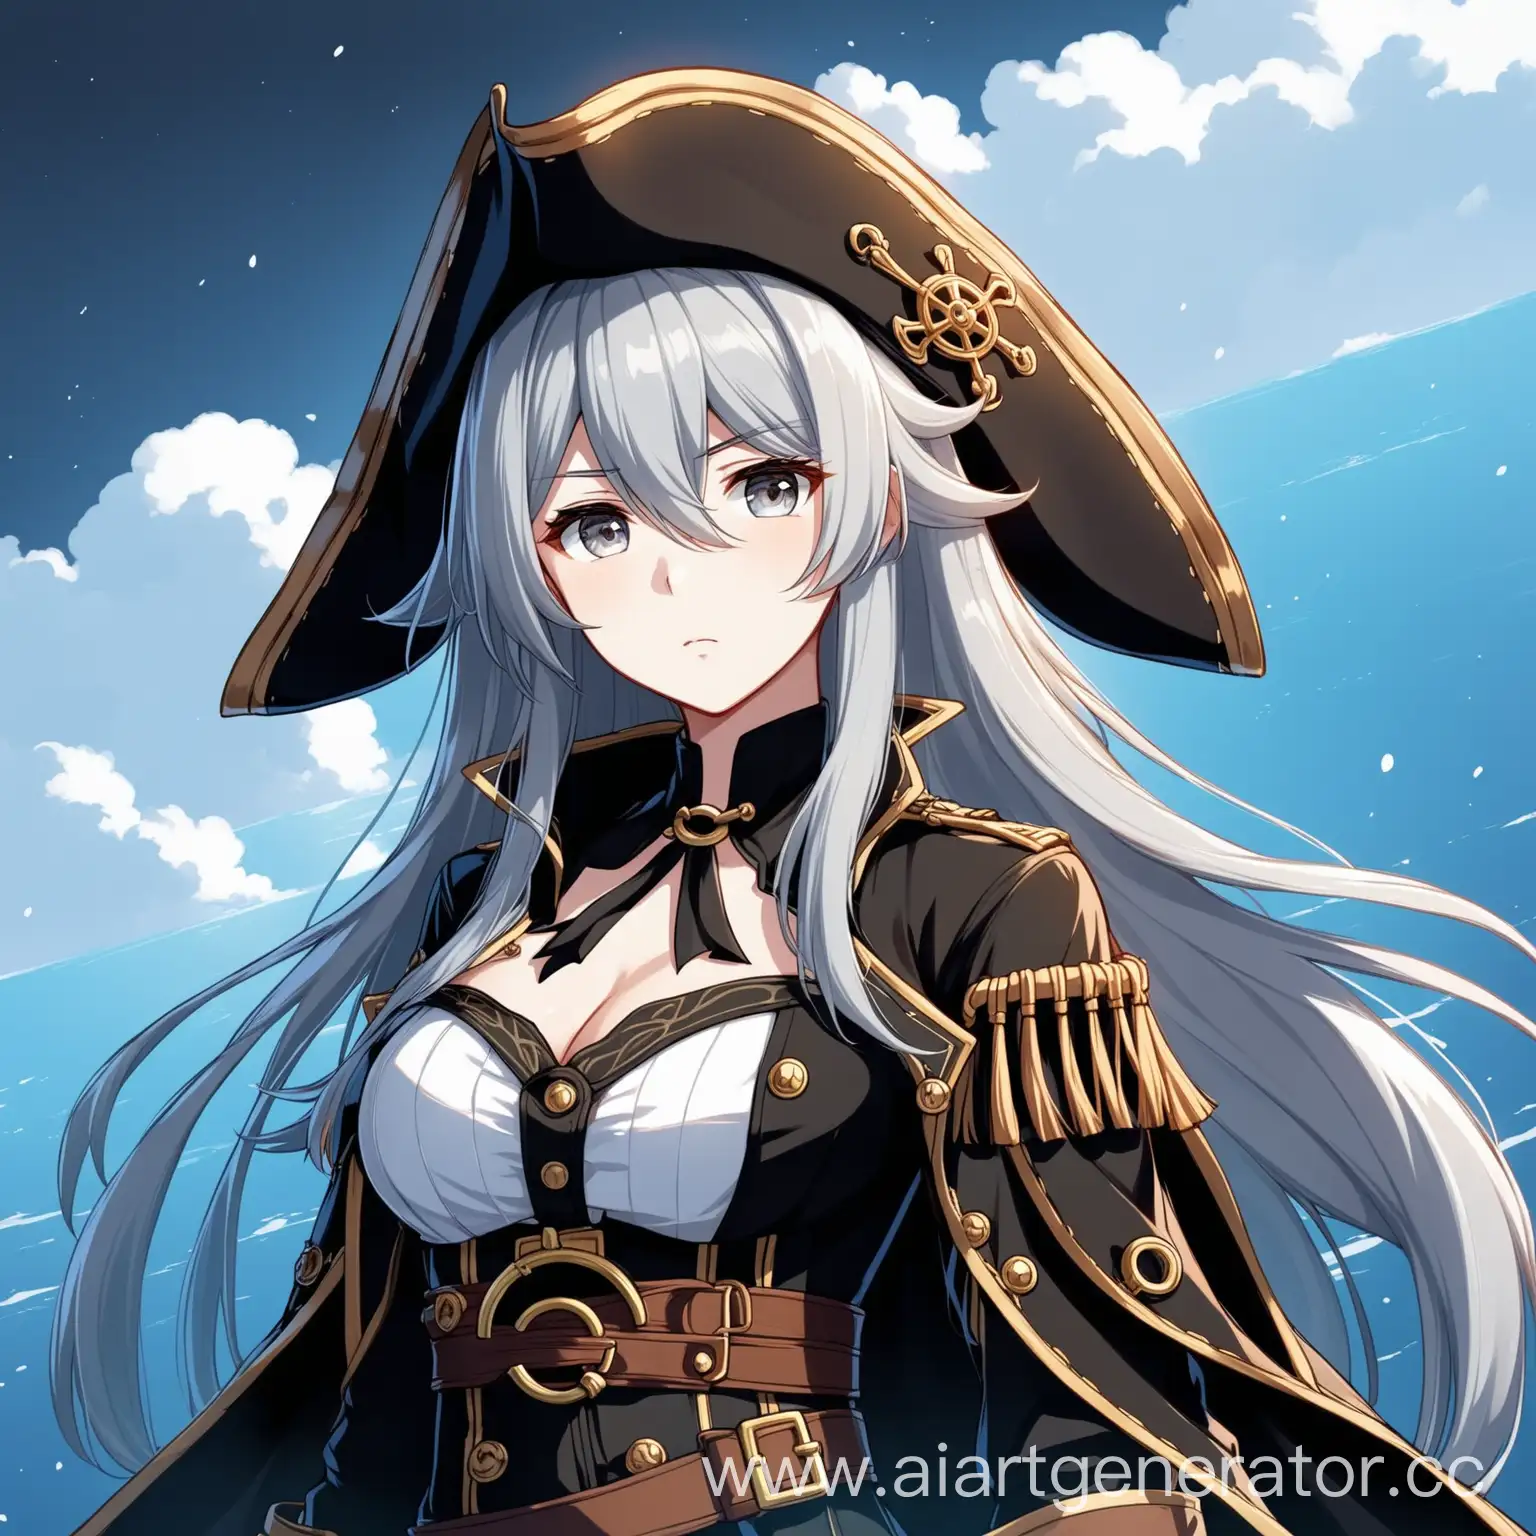 Hanya-from-Honkai-Star-Rail-Enigmatic-Anime-Pirate-with-Gray-Hair-and-Emotionless-Gaze